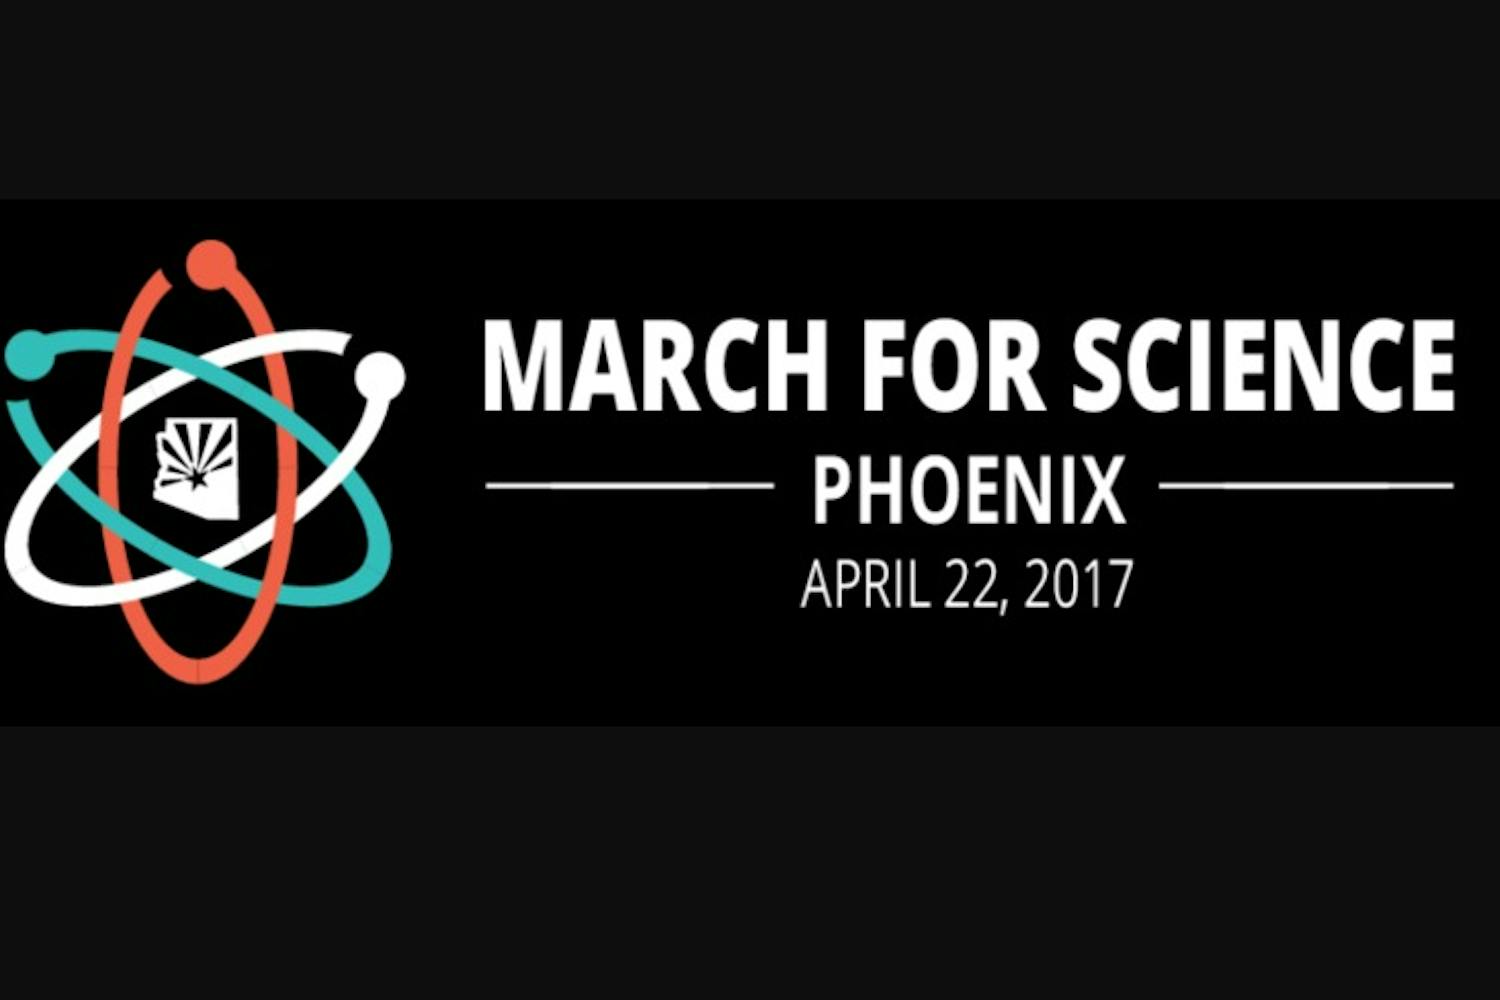 The March for Science will take place in Phoenix, Arizona on April 22, 2017.